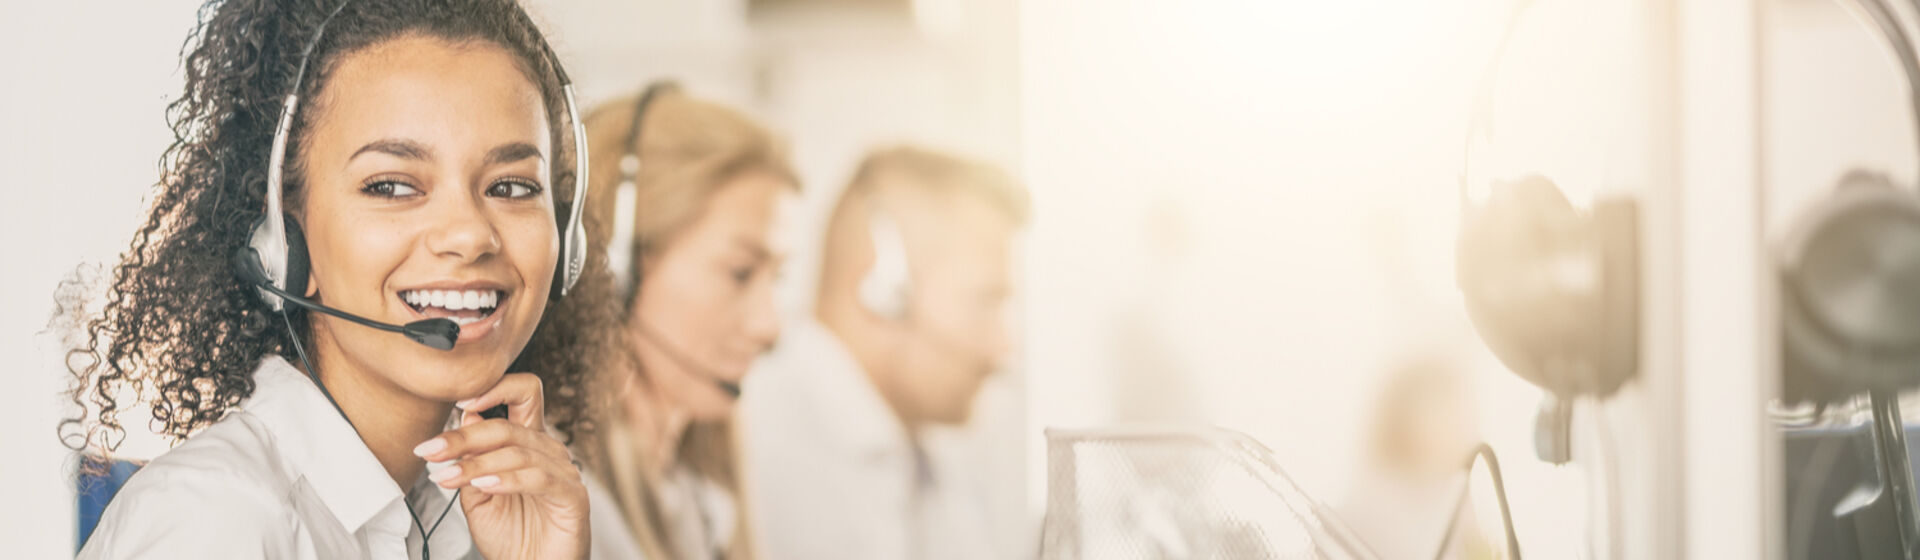 young lady with headset on customer service call with colleagues in back ground